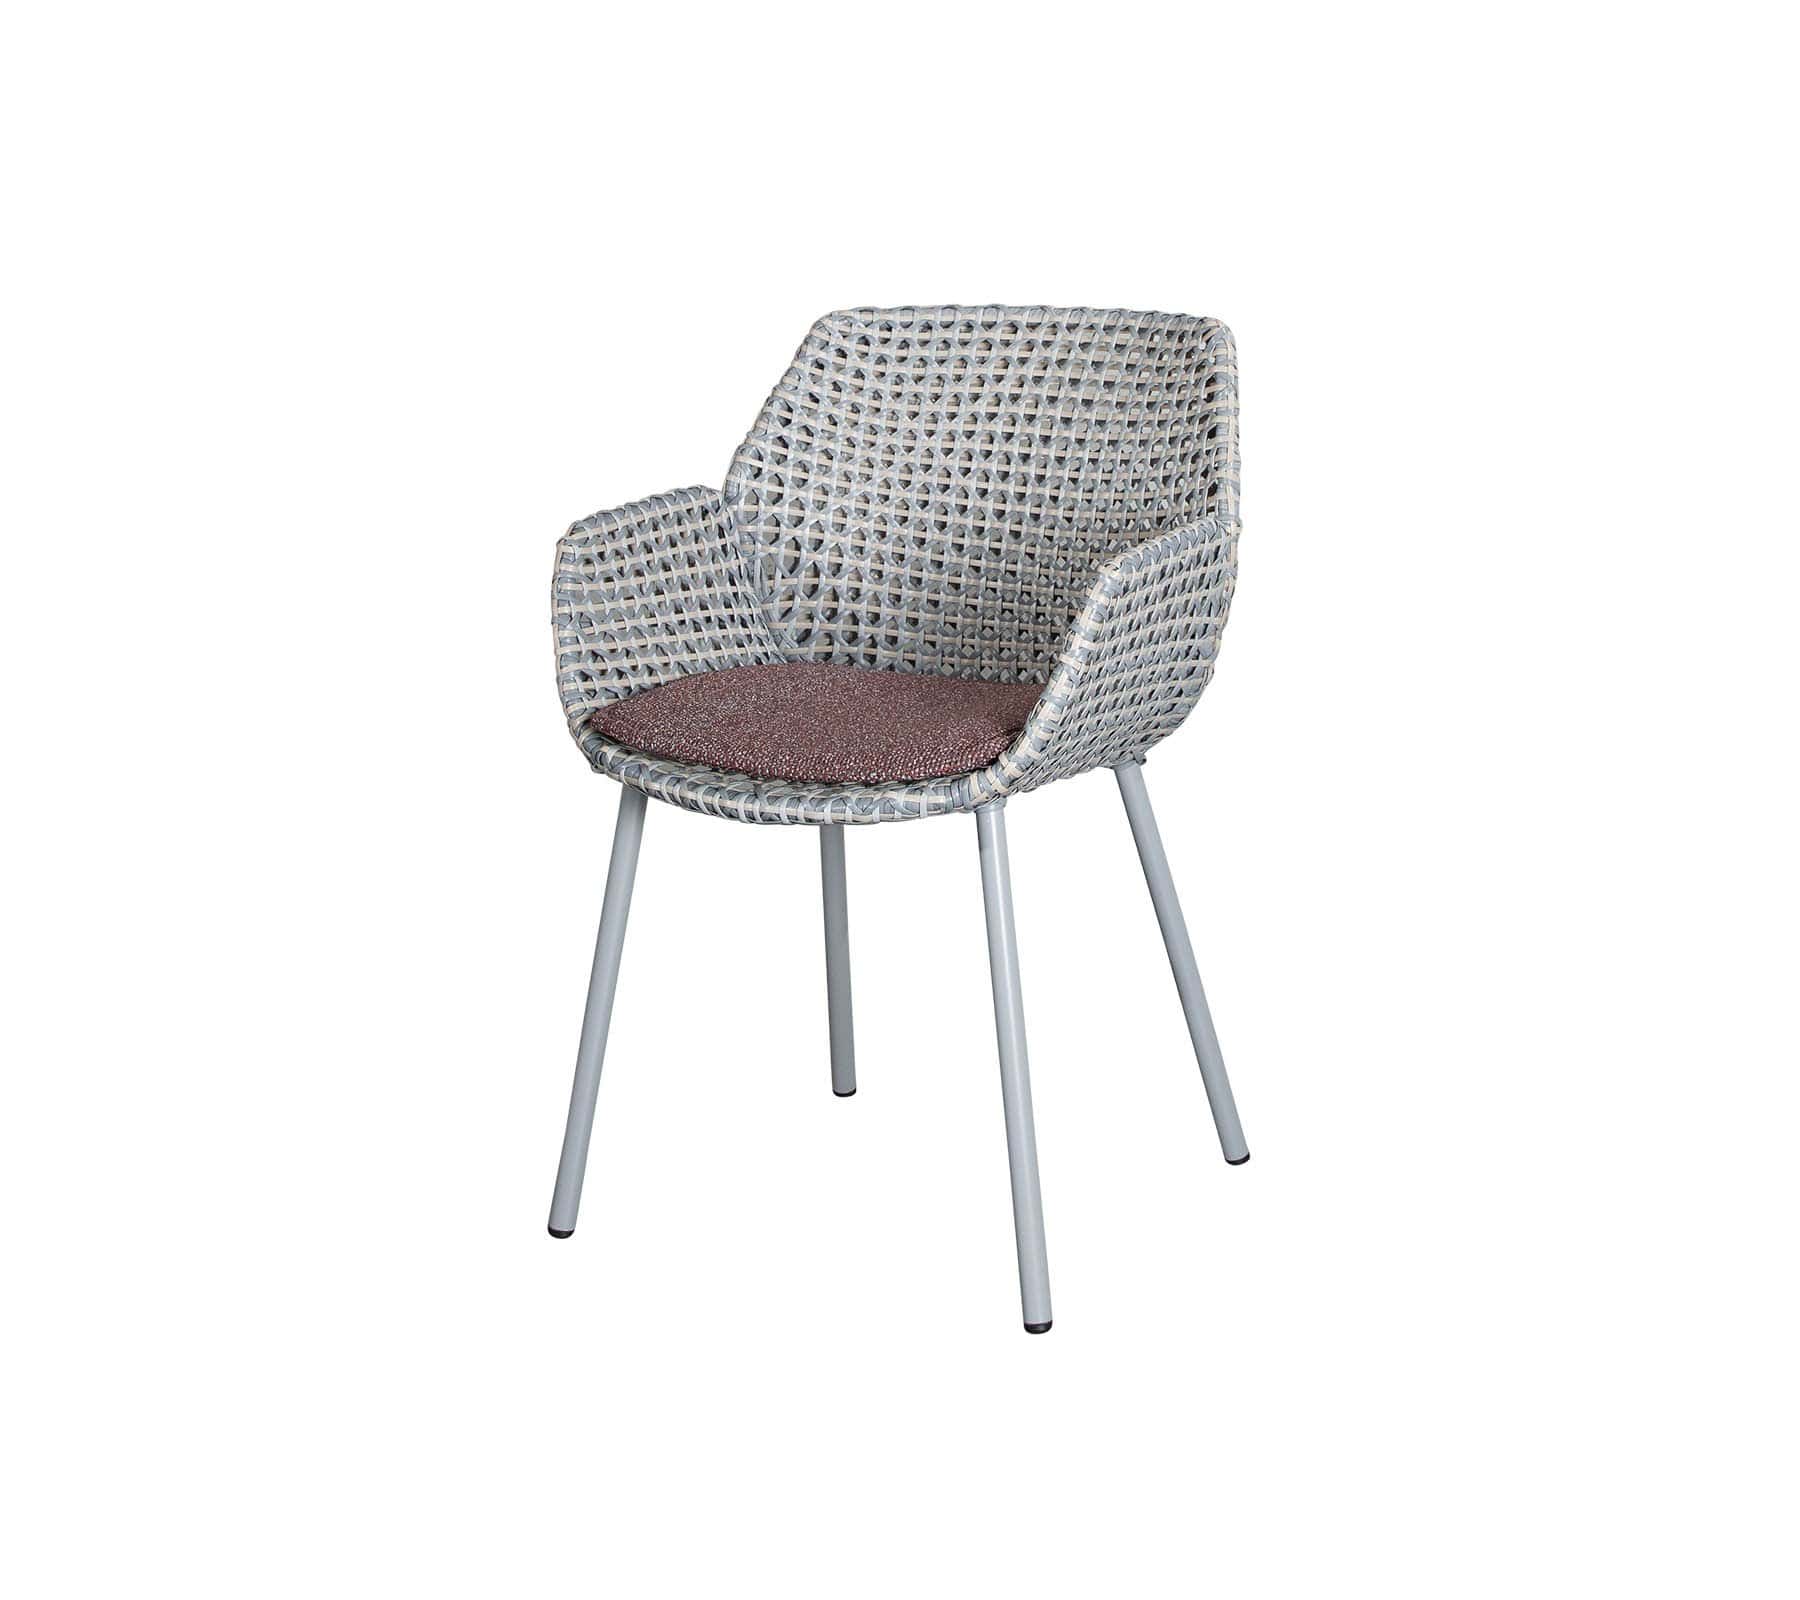 Boxhill's Vibe light grey outdoor armchair with maroon cushion on white background